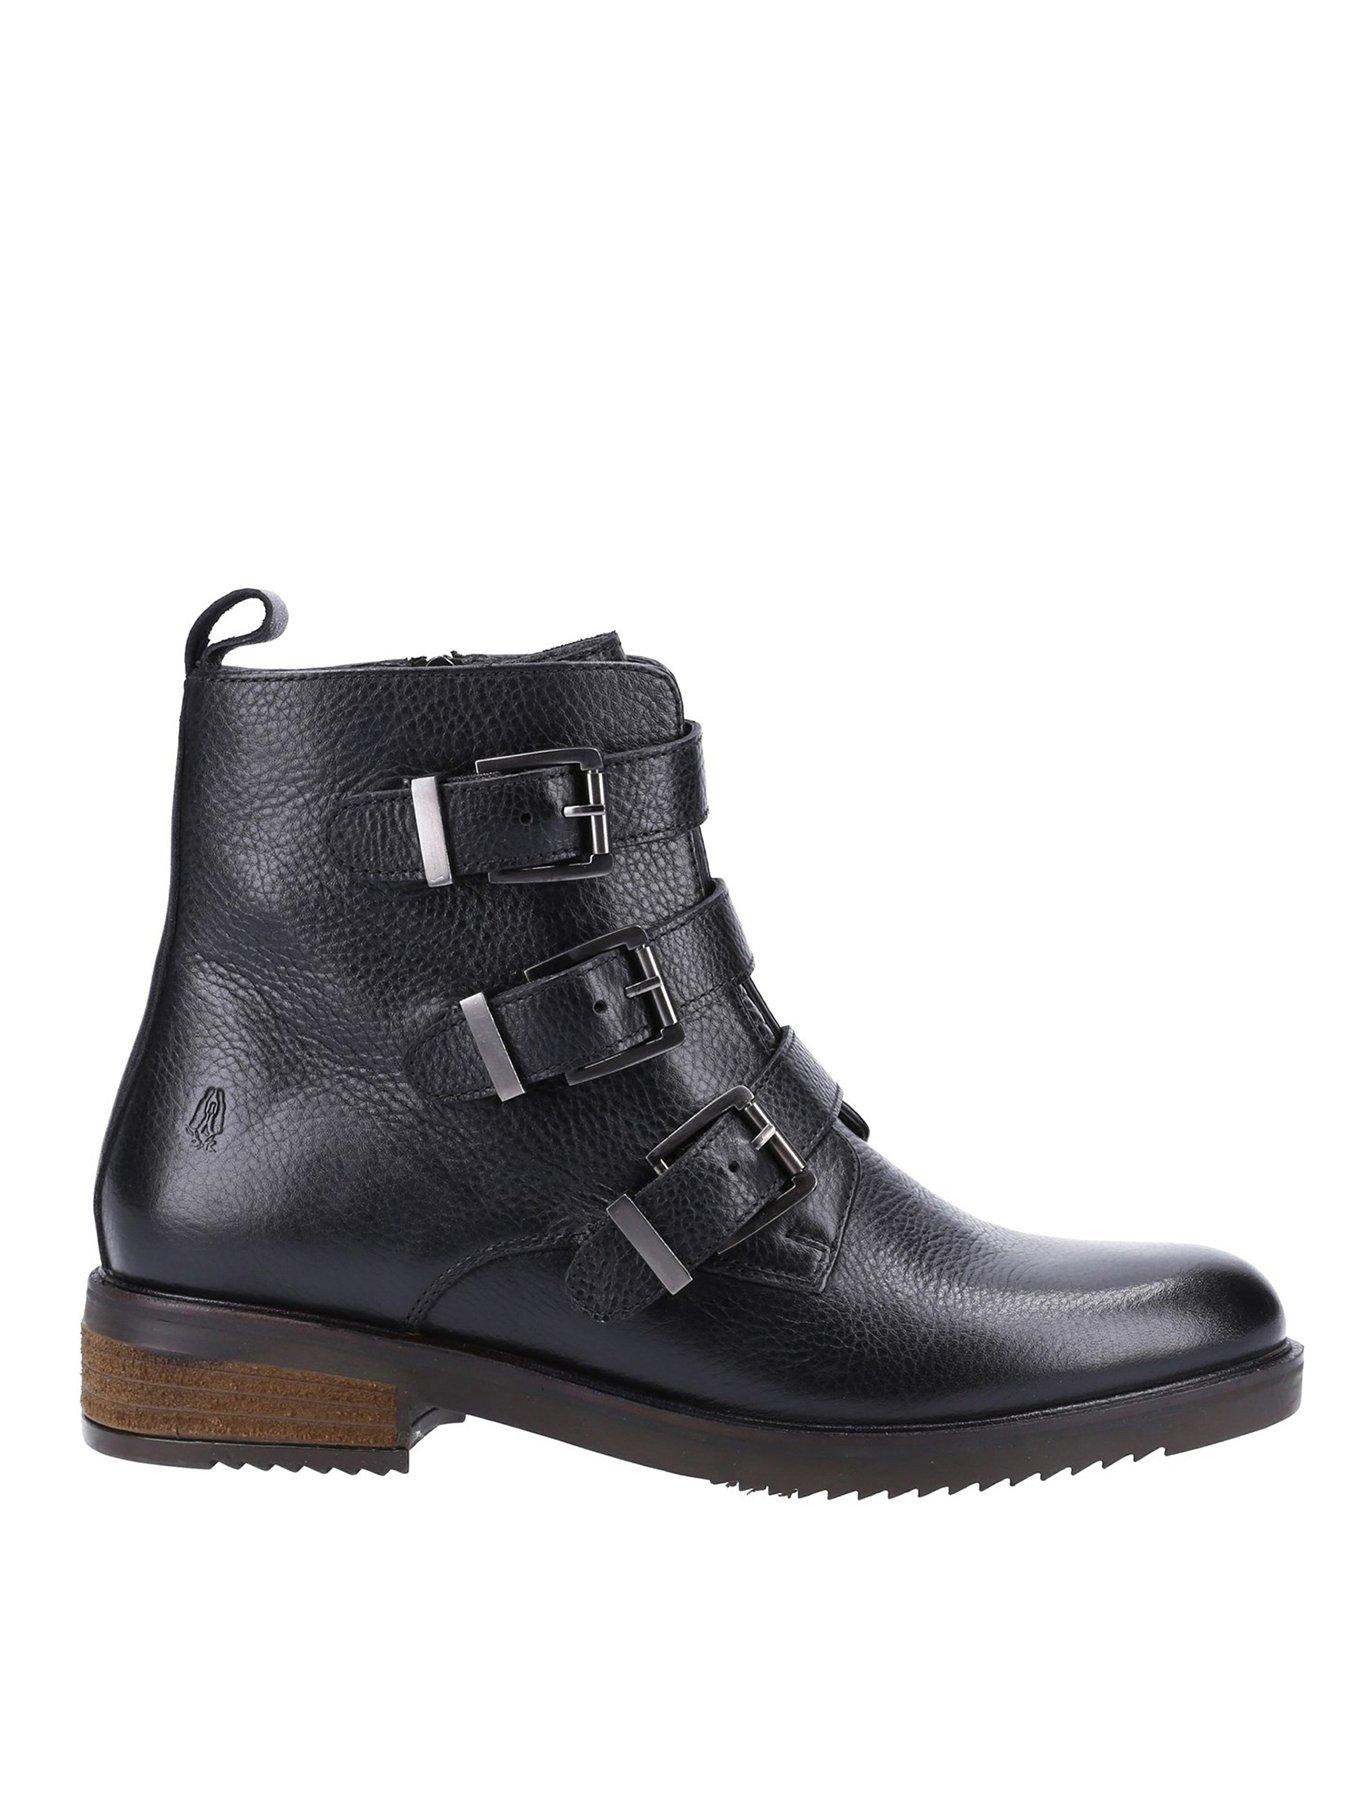 Women Pria Buckle Ankle Boots - Black